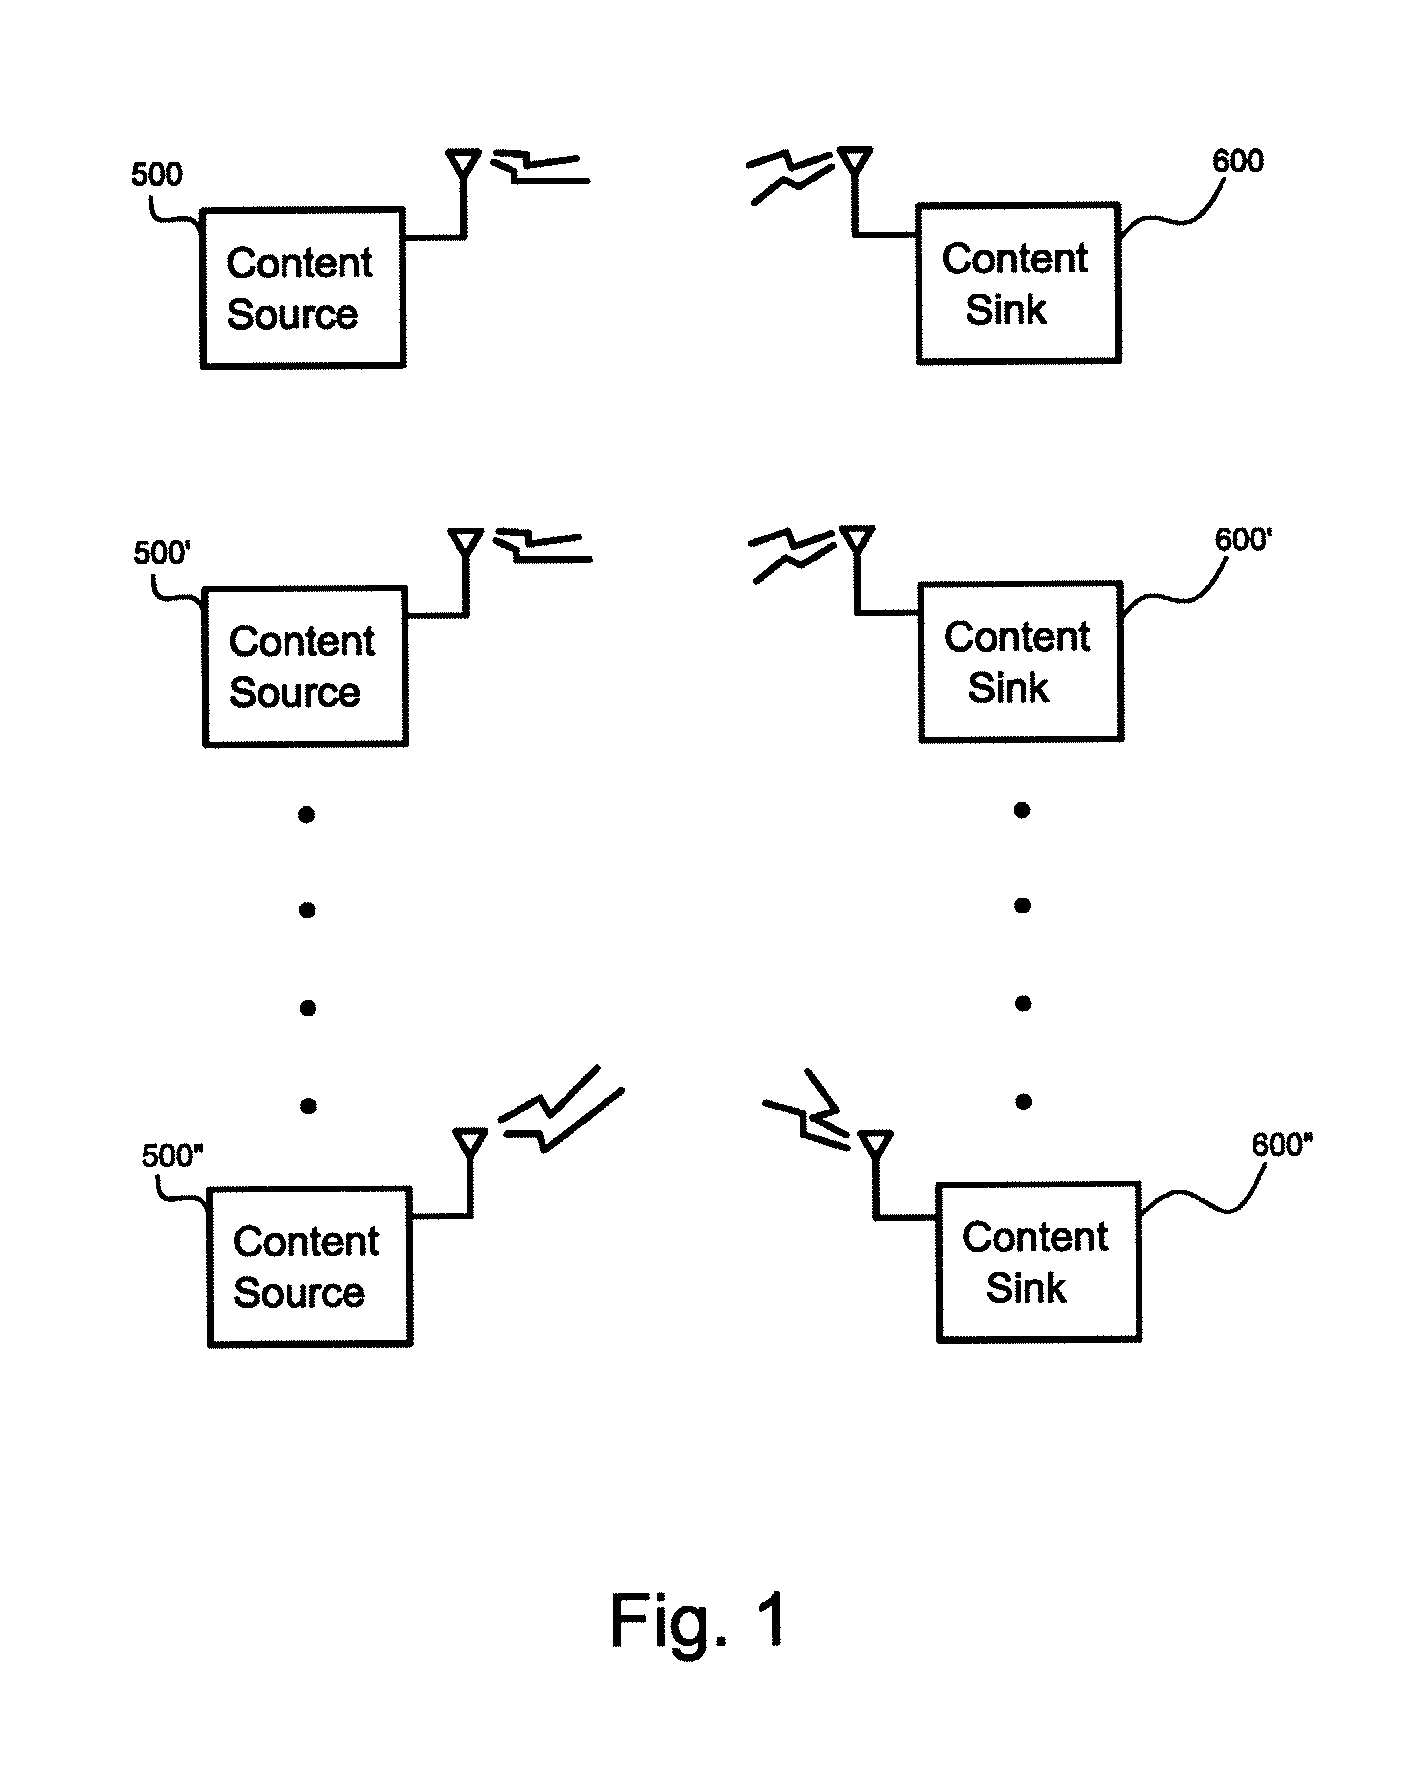 Content Source, Content Sink, And Method for Natively Managing and Delivering Active Content From One or More Content Sources to One or More Content Sinks Wirelessly